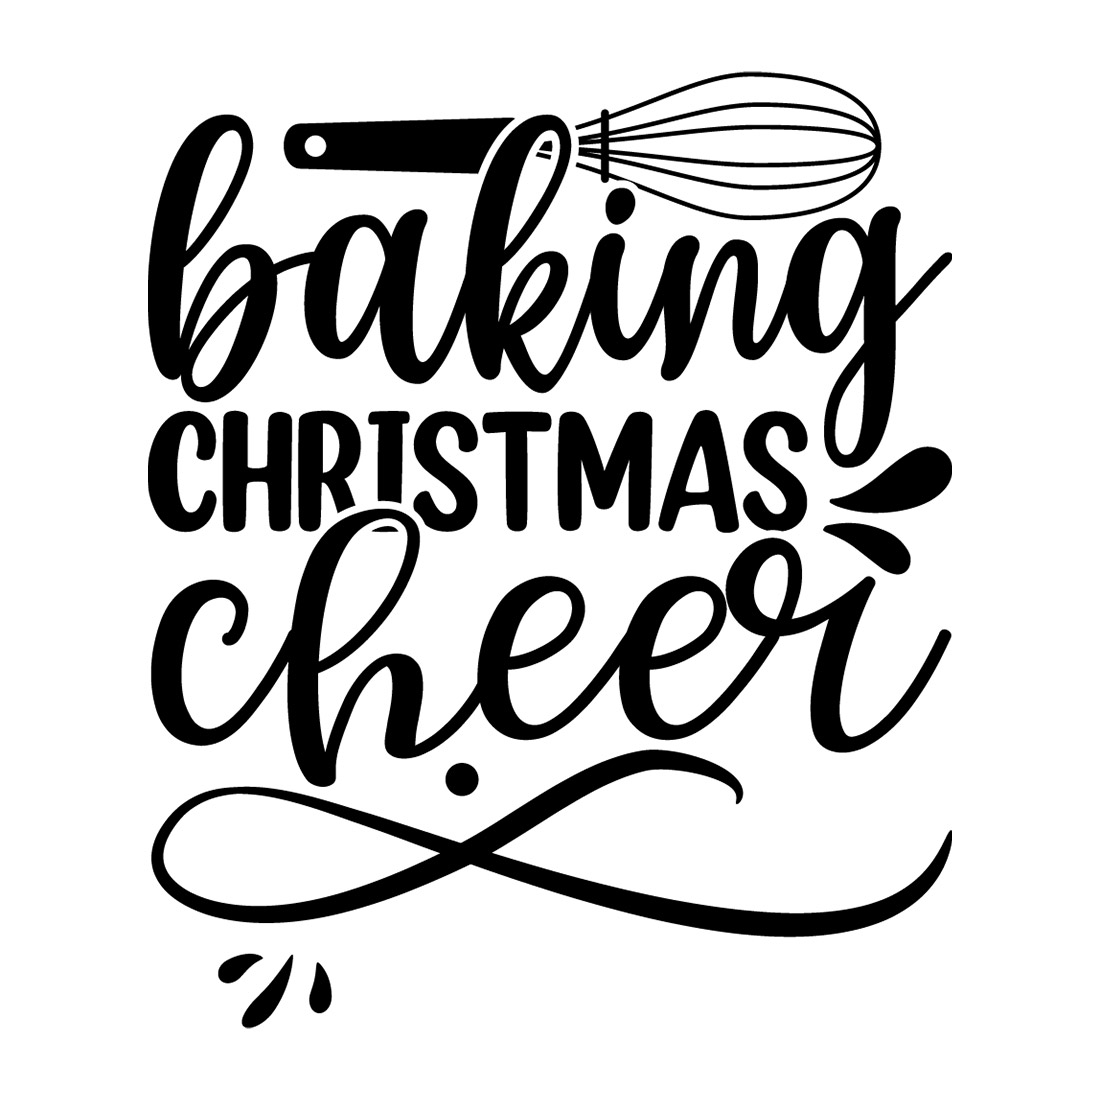 cooking - Baking christmas cheer preview image.